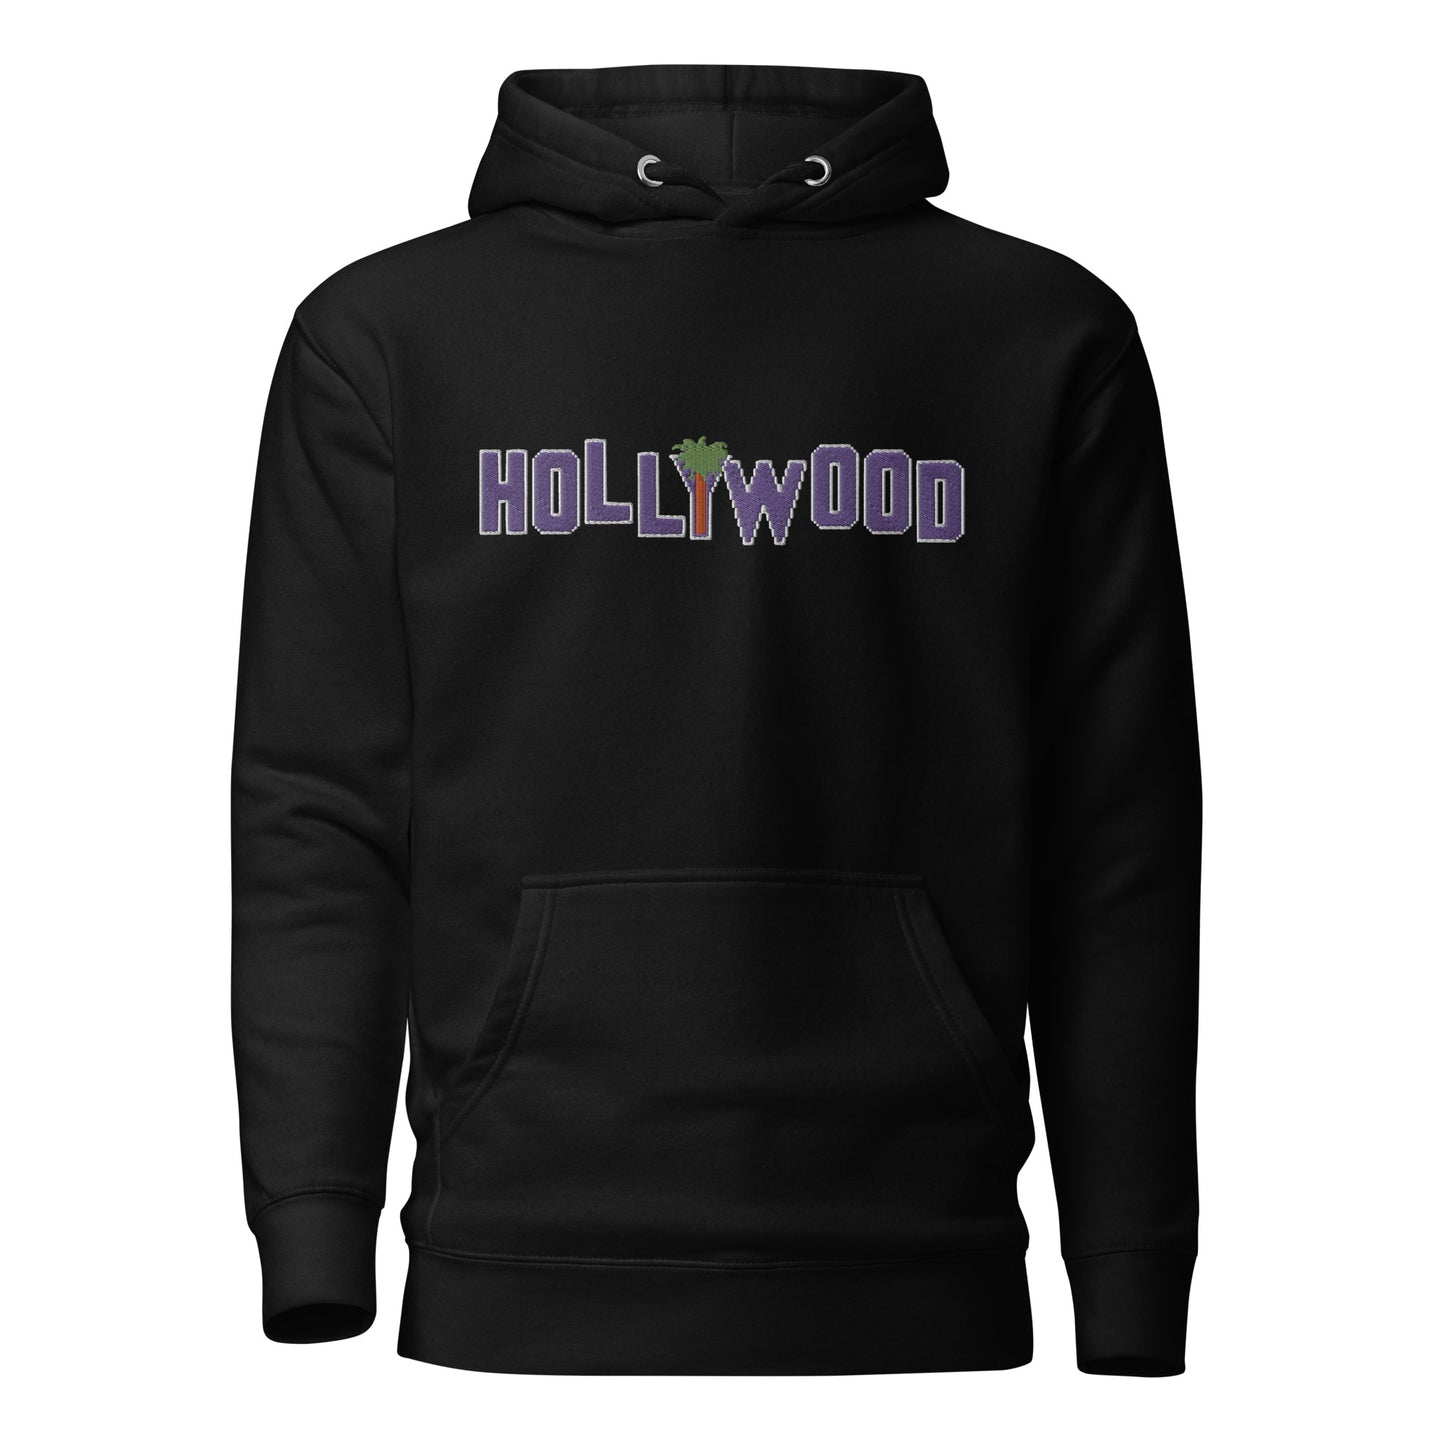 Embroidered Large Center, Printed Back Unisex Hoodie / Hooded Sweatshirt "Hollywood"